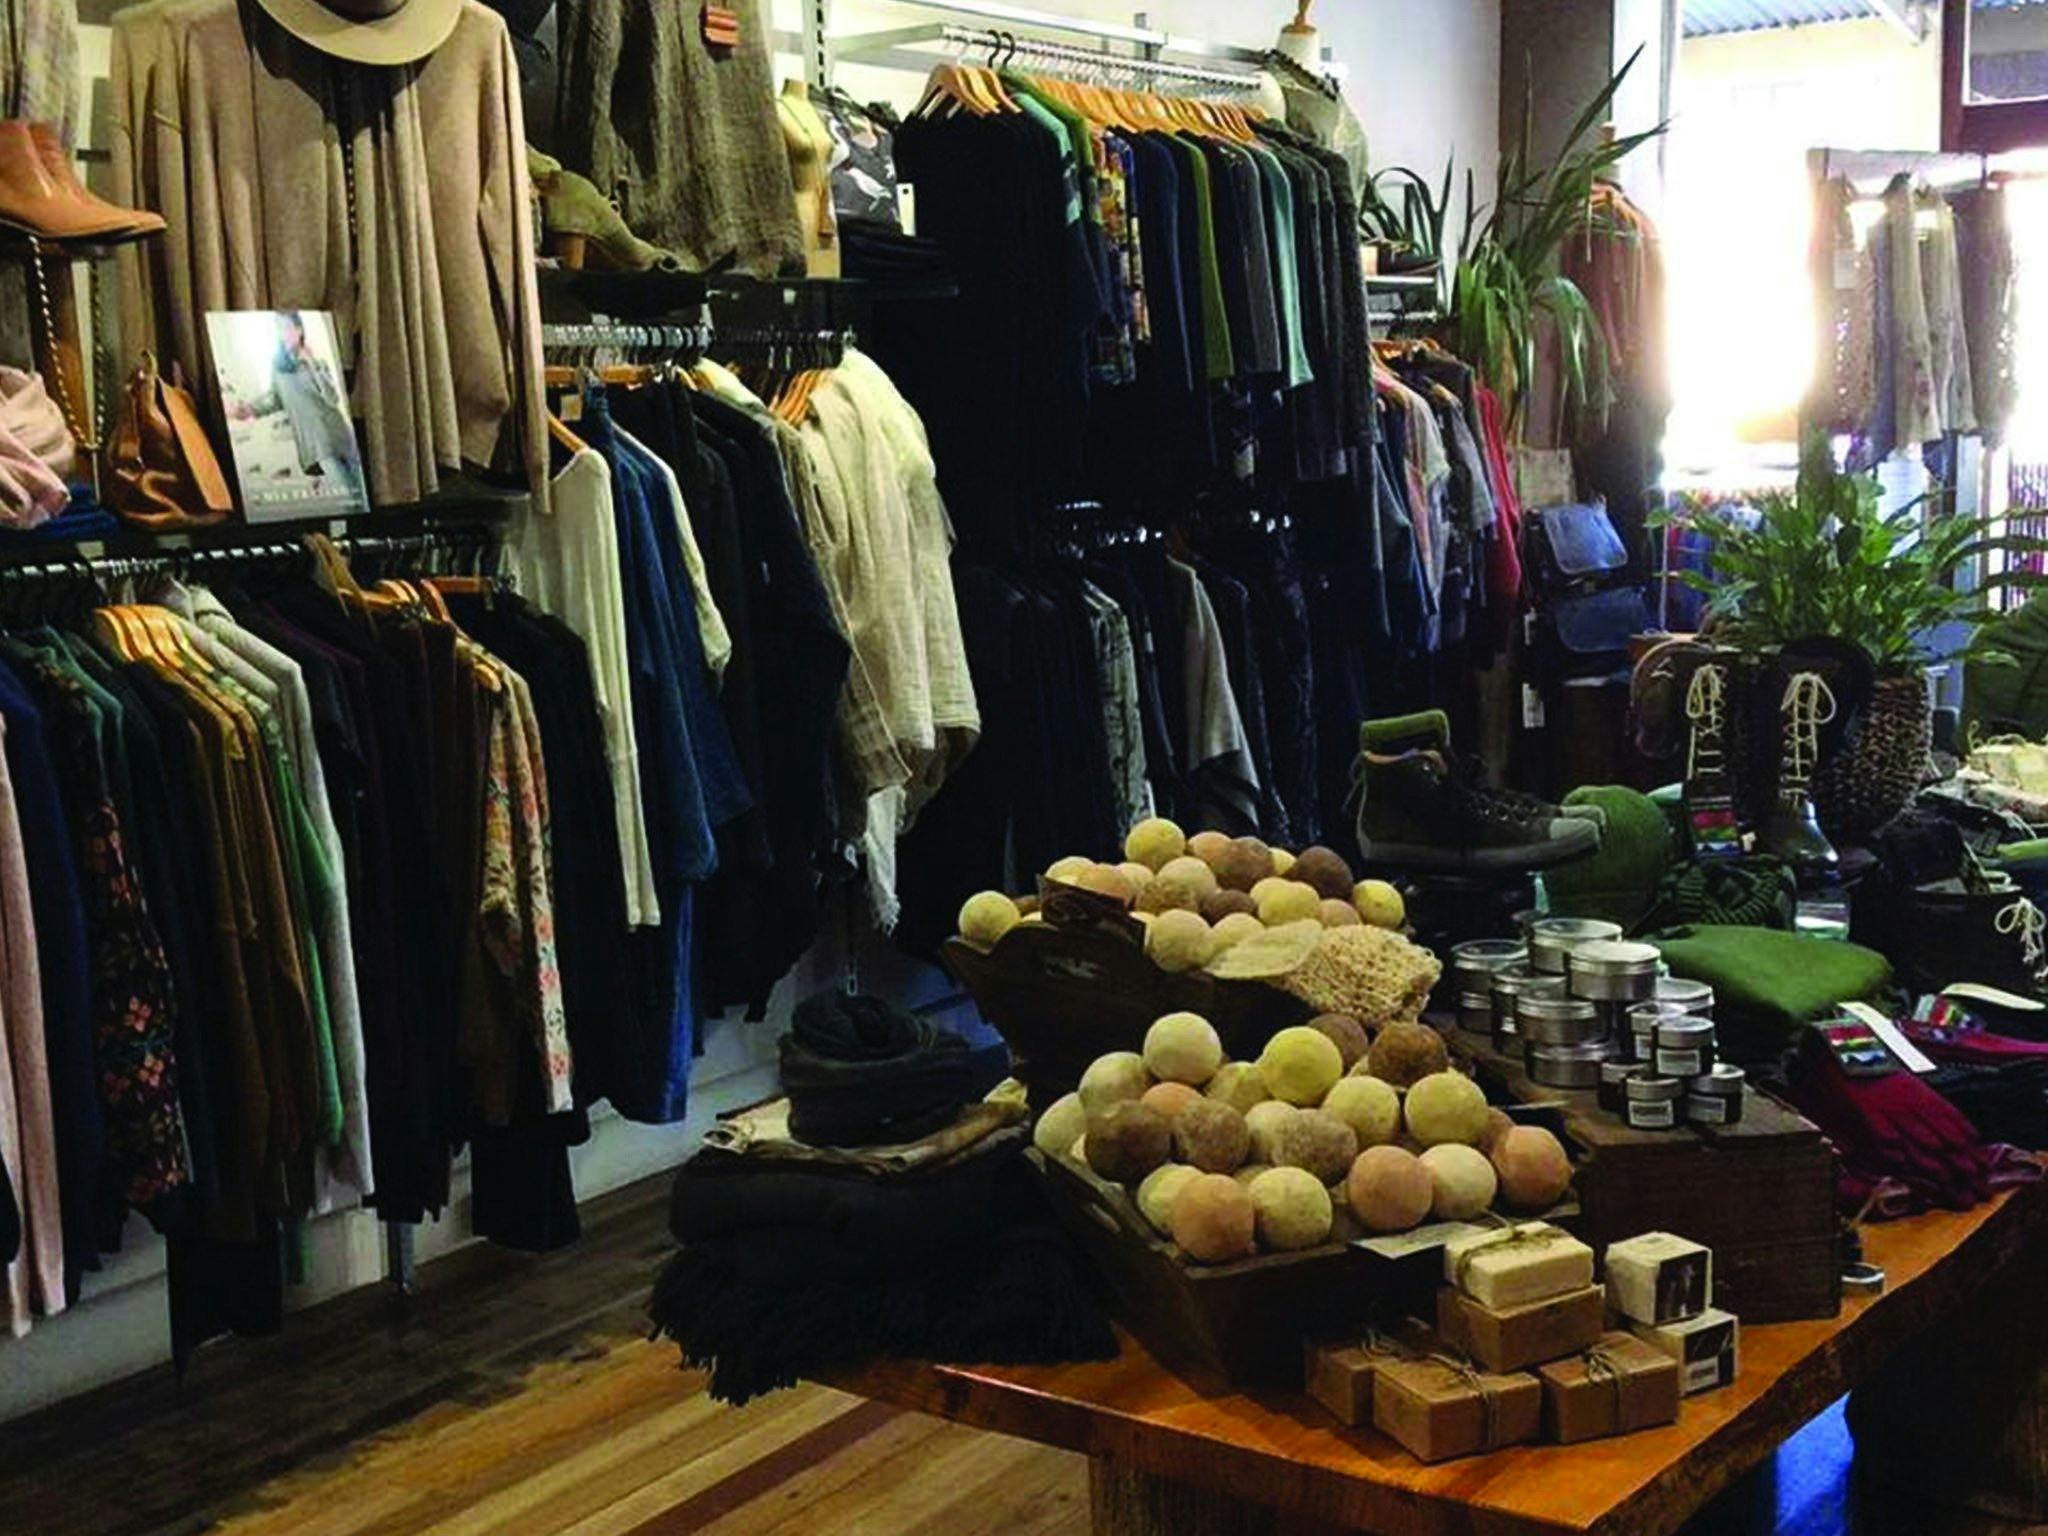 Snapshot of inside Dalcheri store showing wide variety of clothing and other ethically sourced items